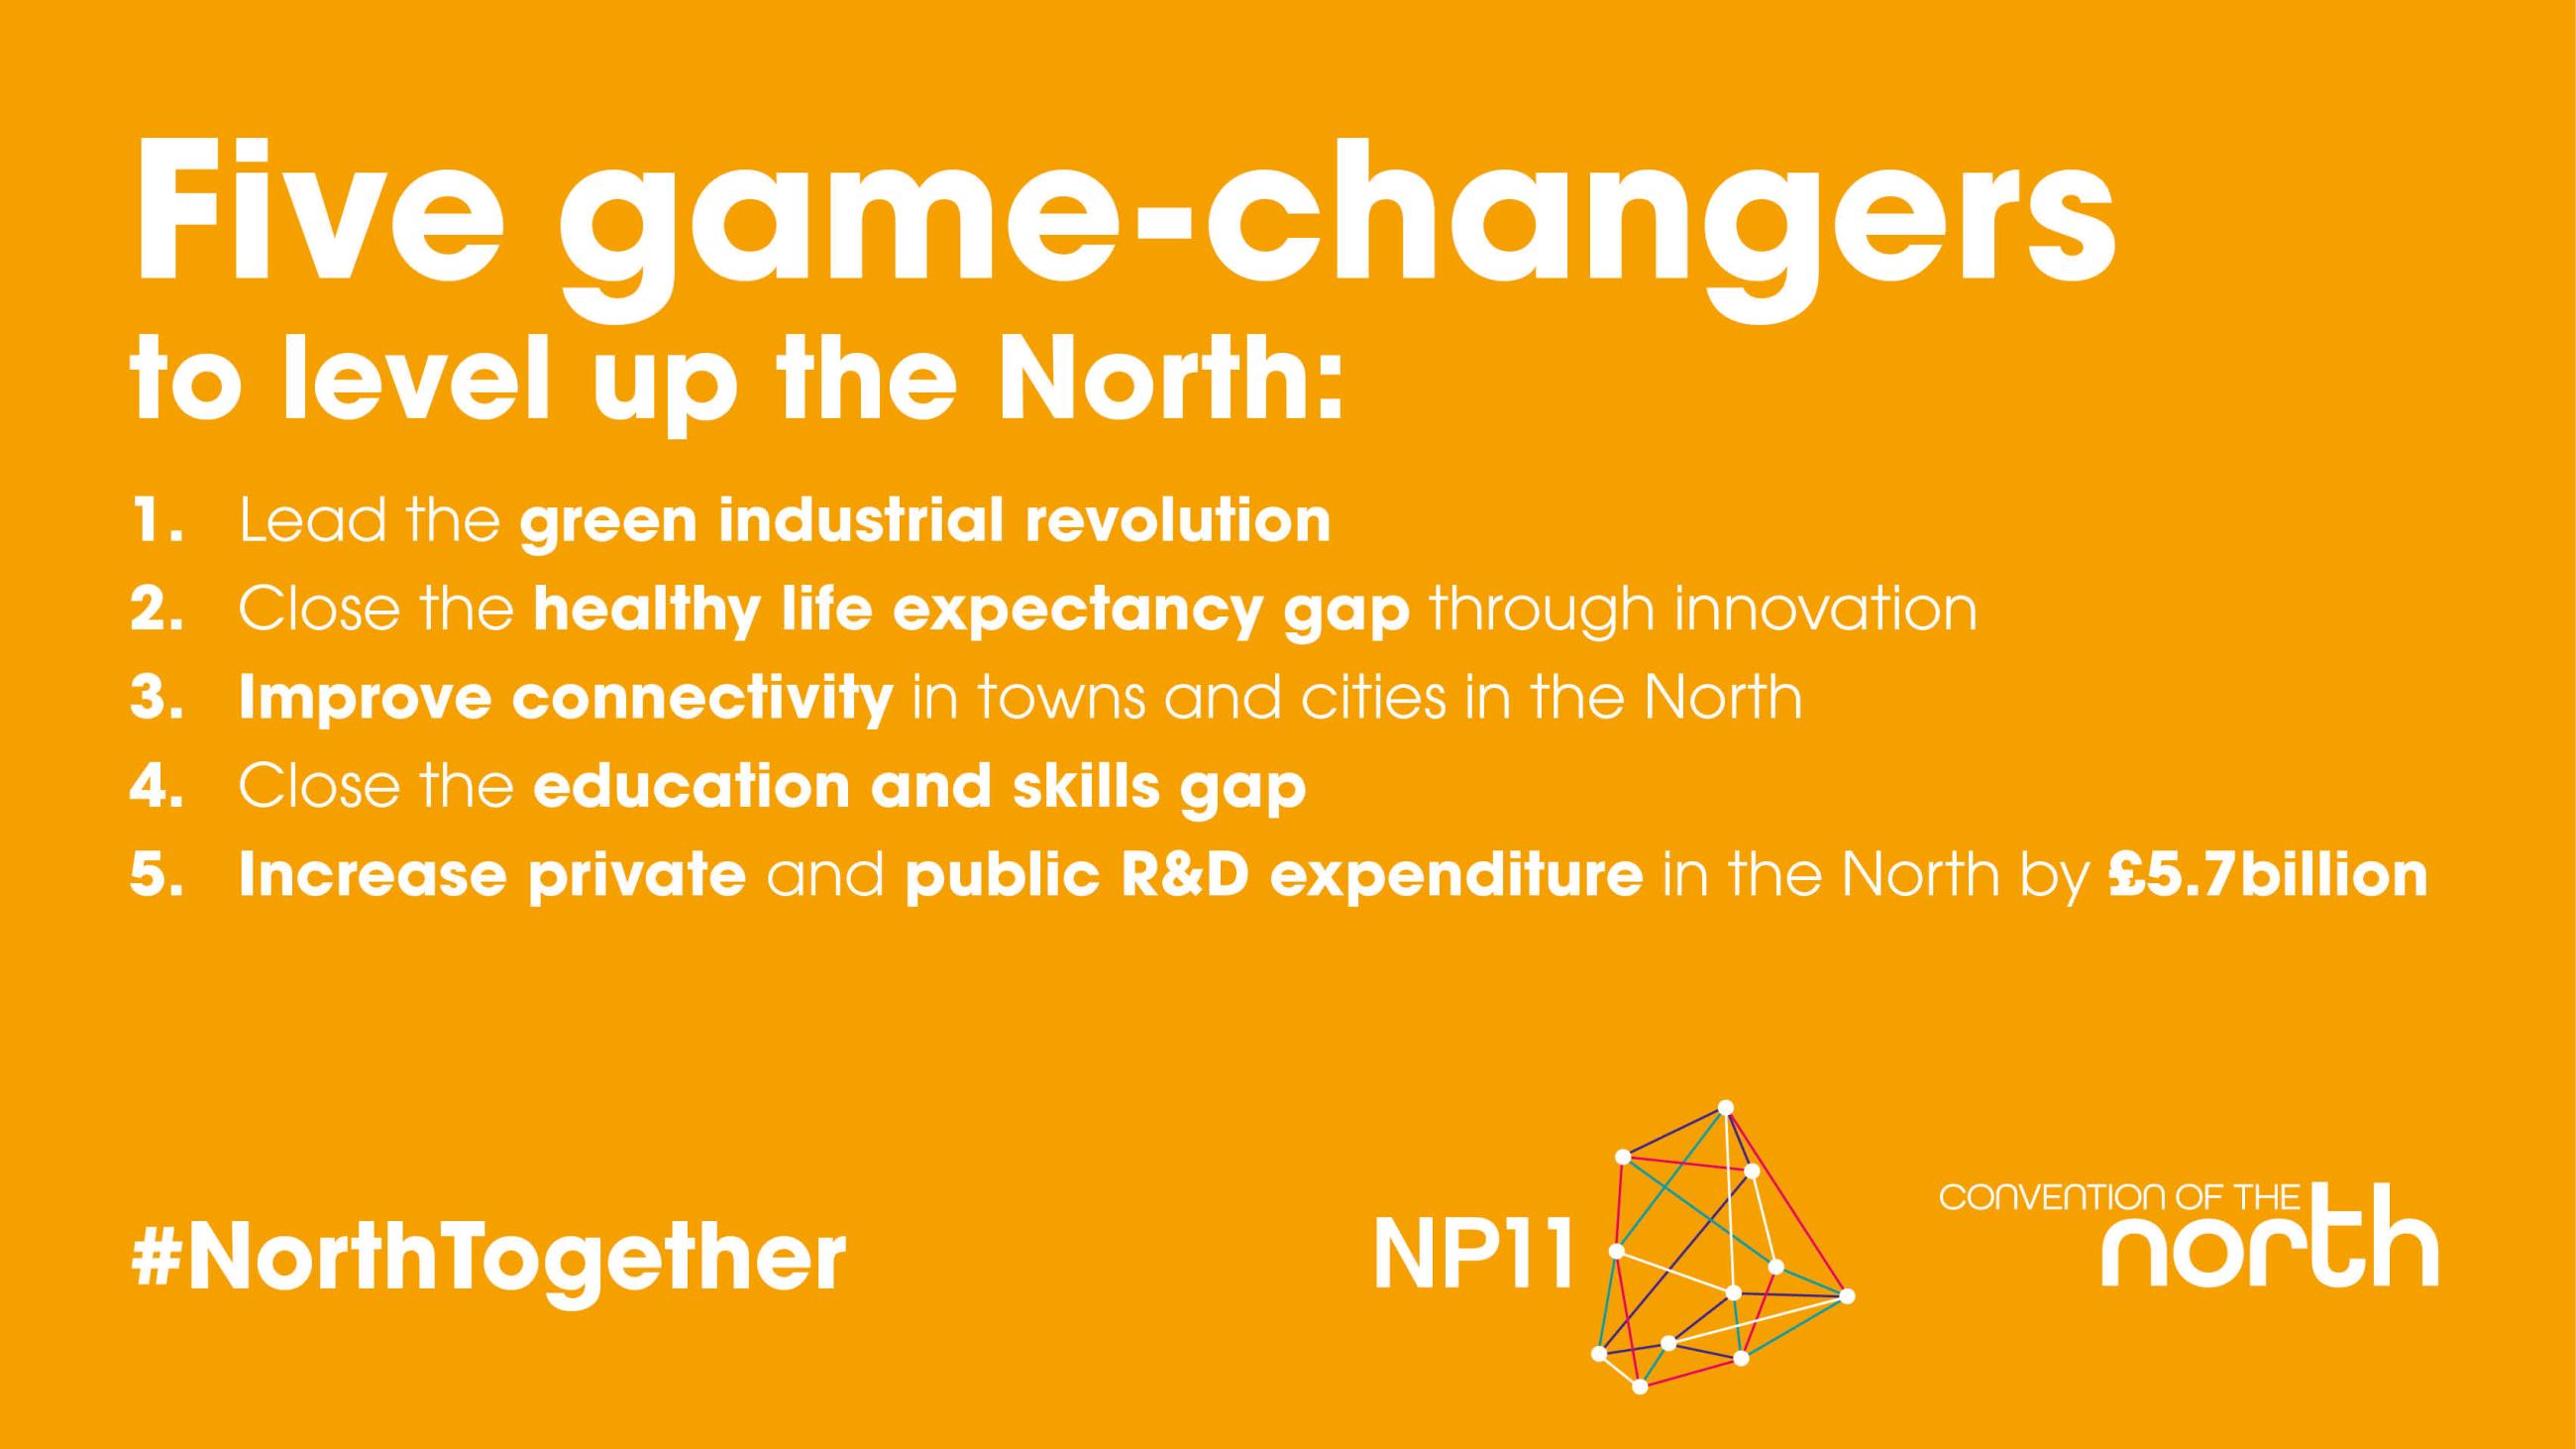 The North's five game-changers